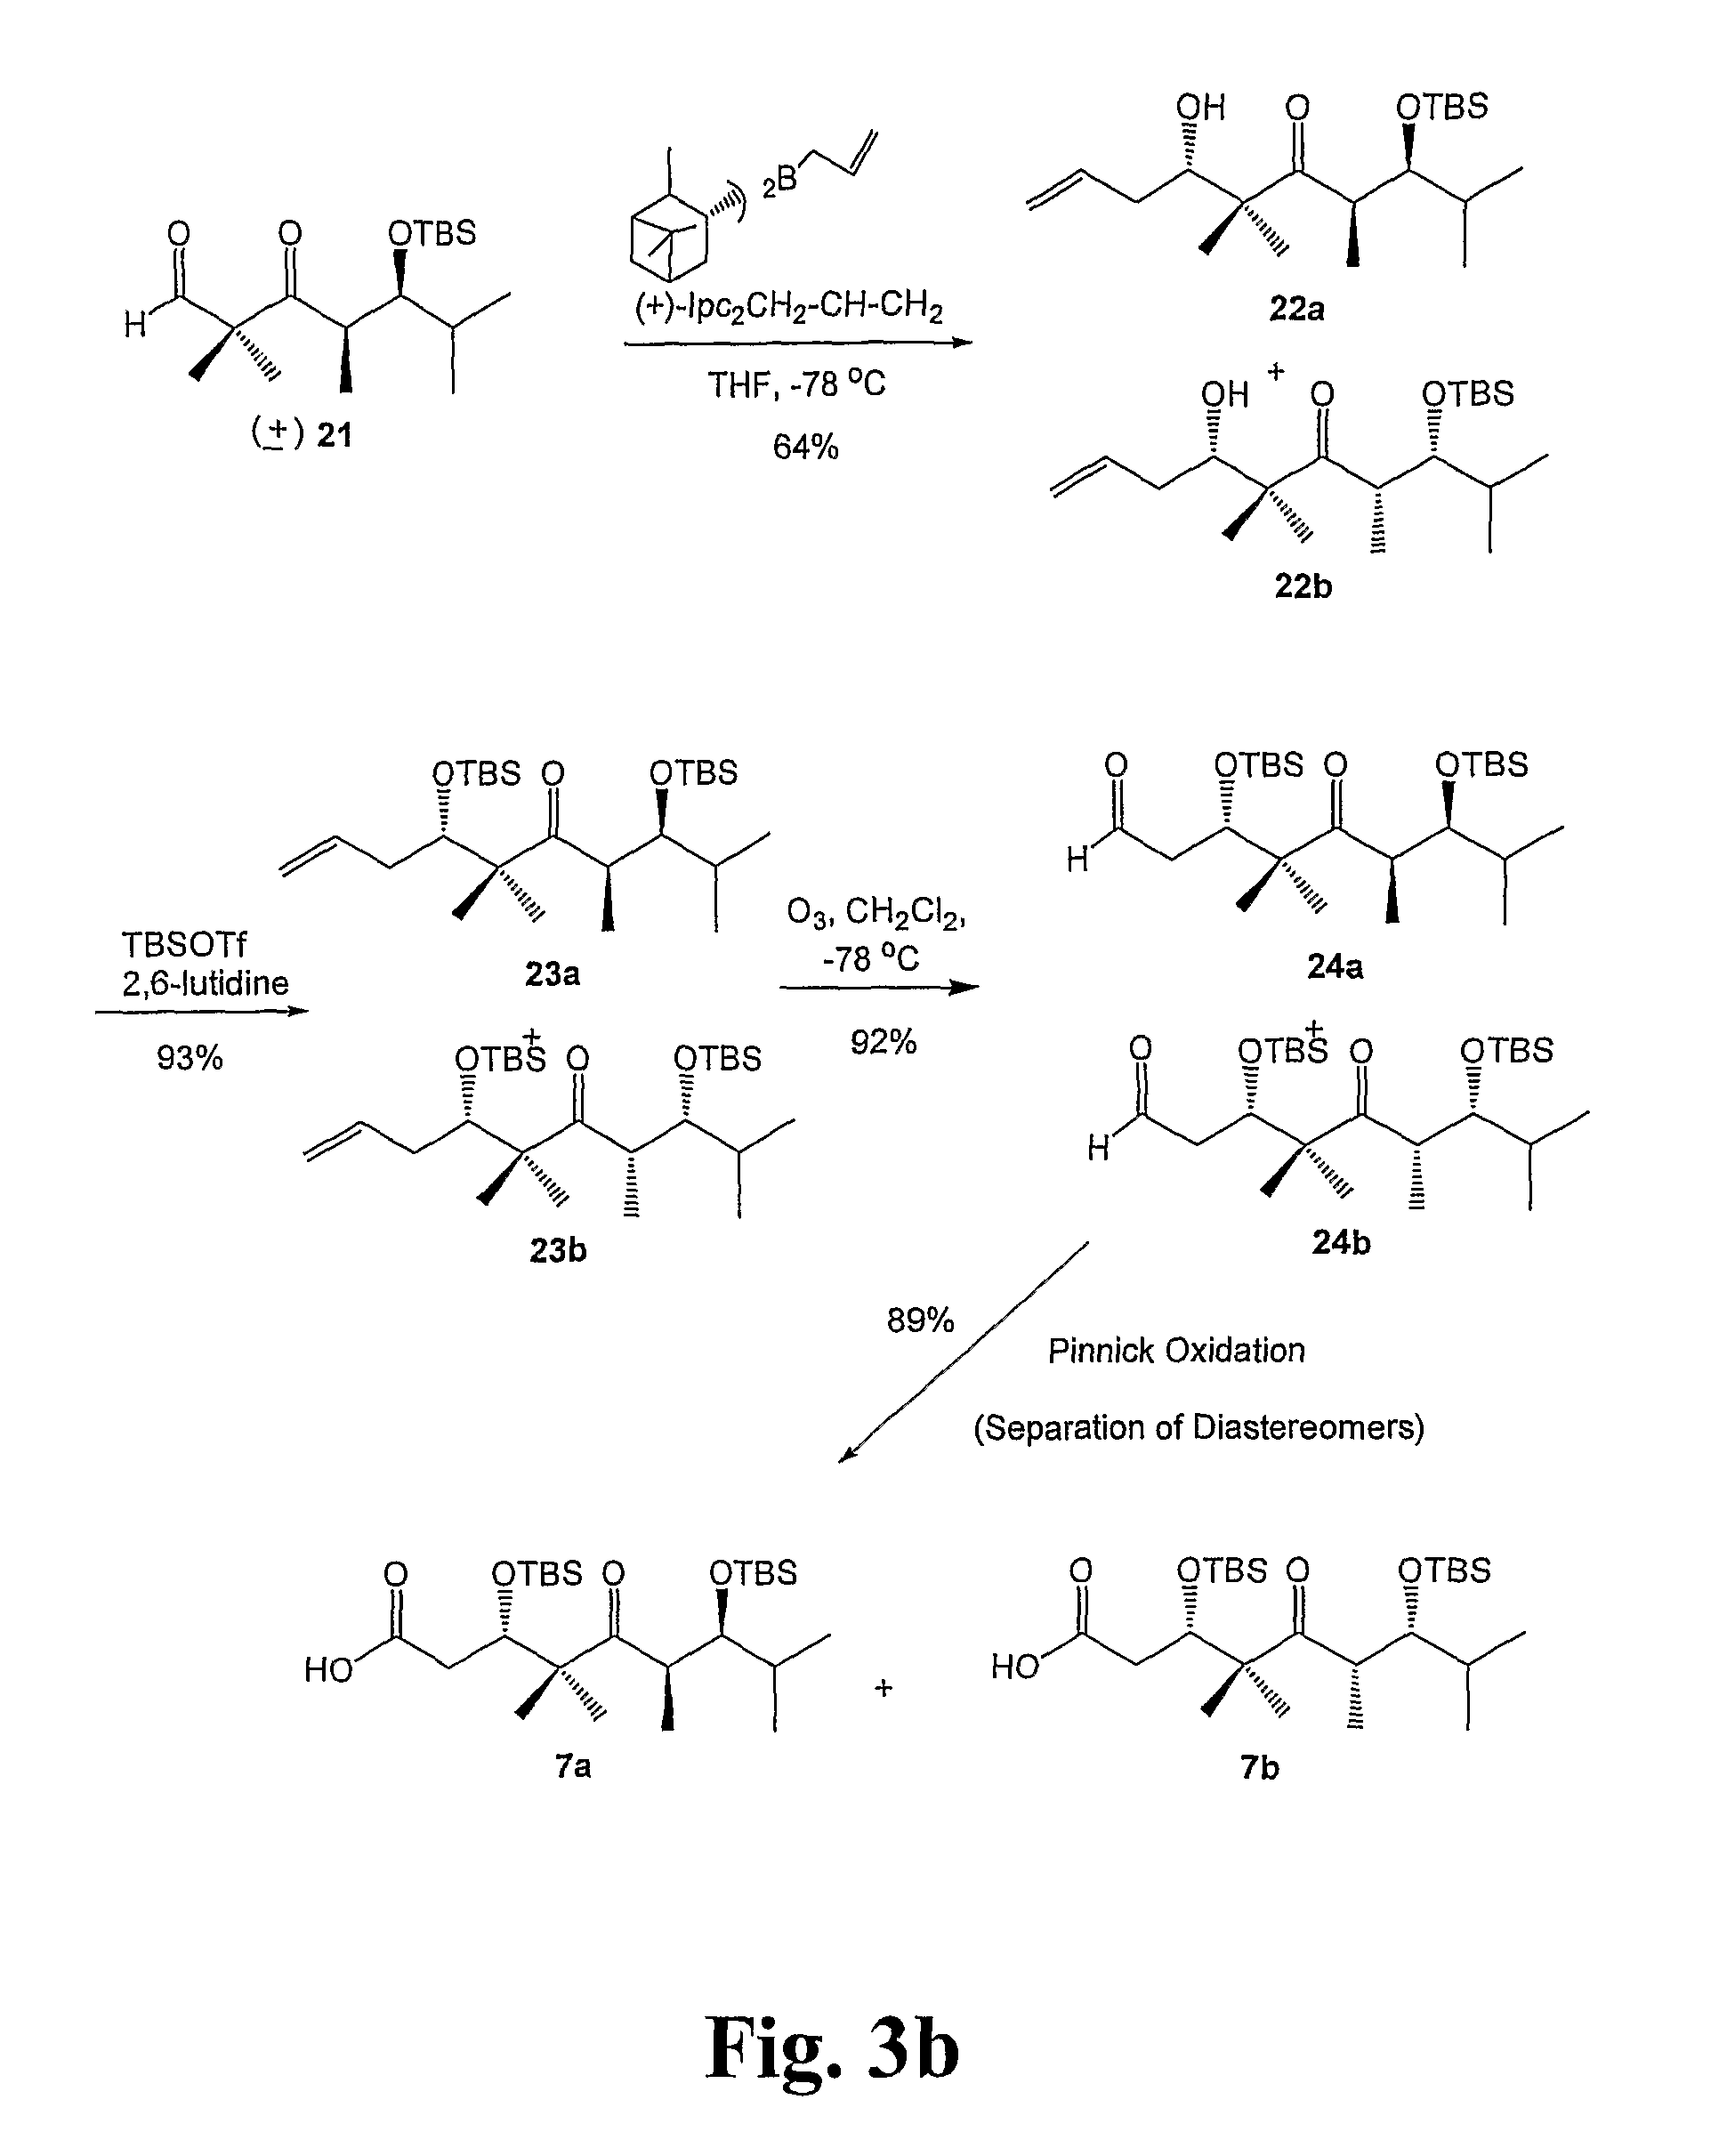 Epithiolone analogues